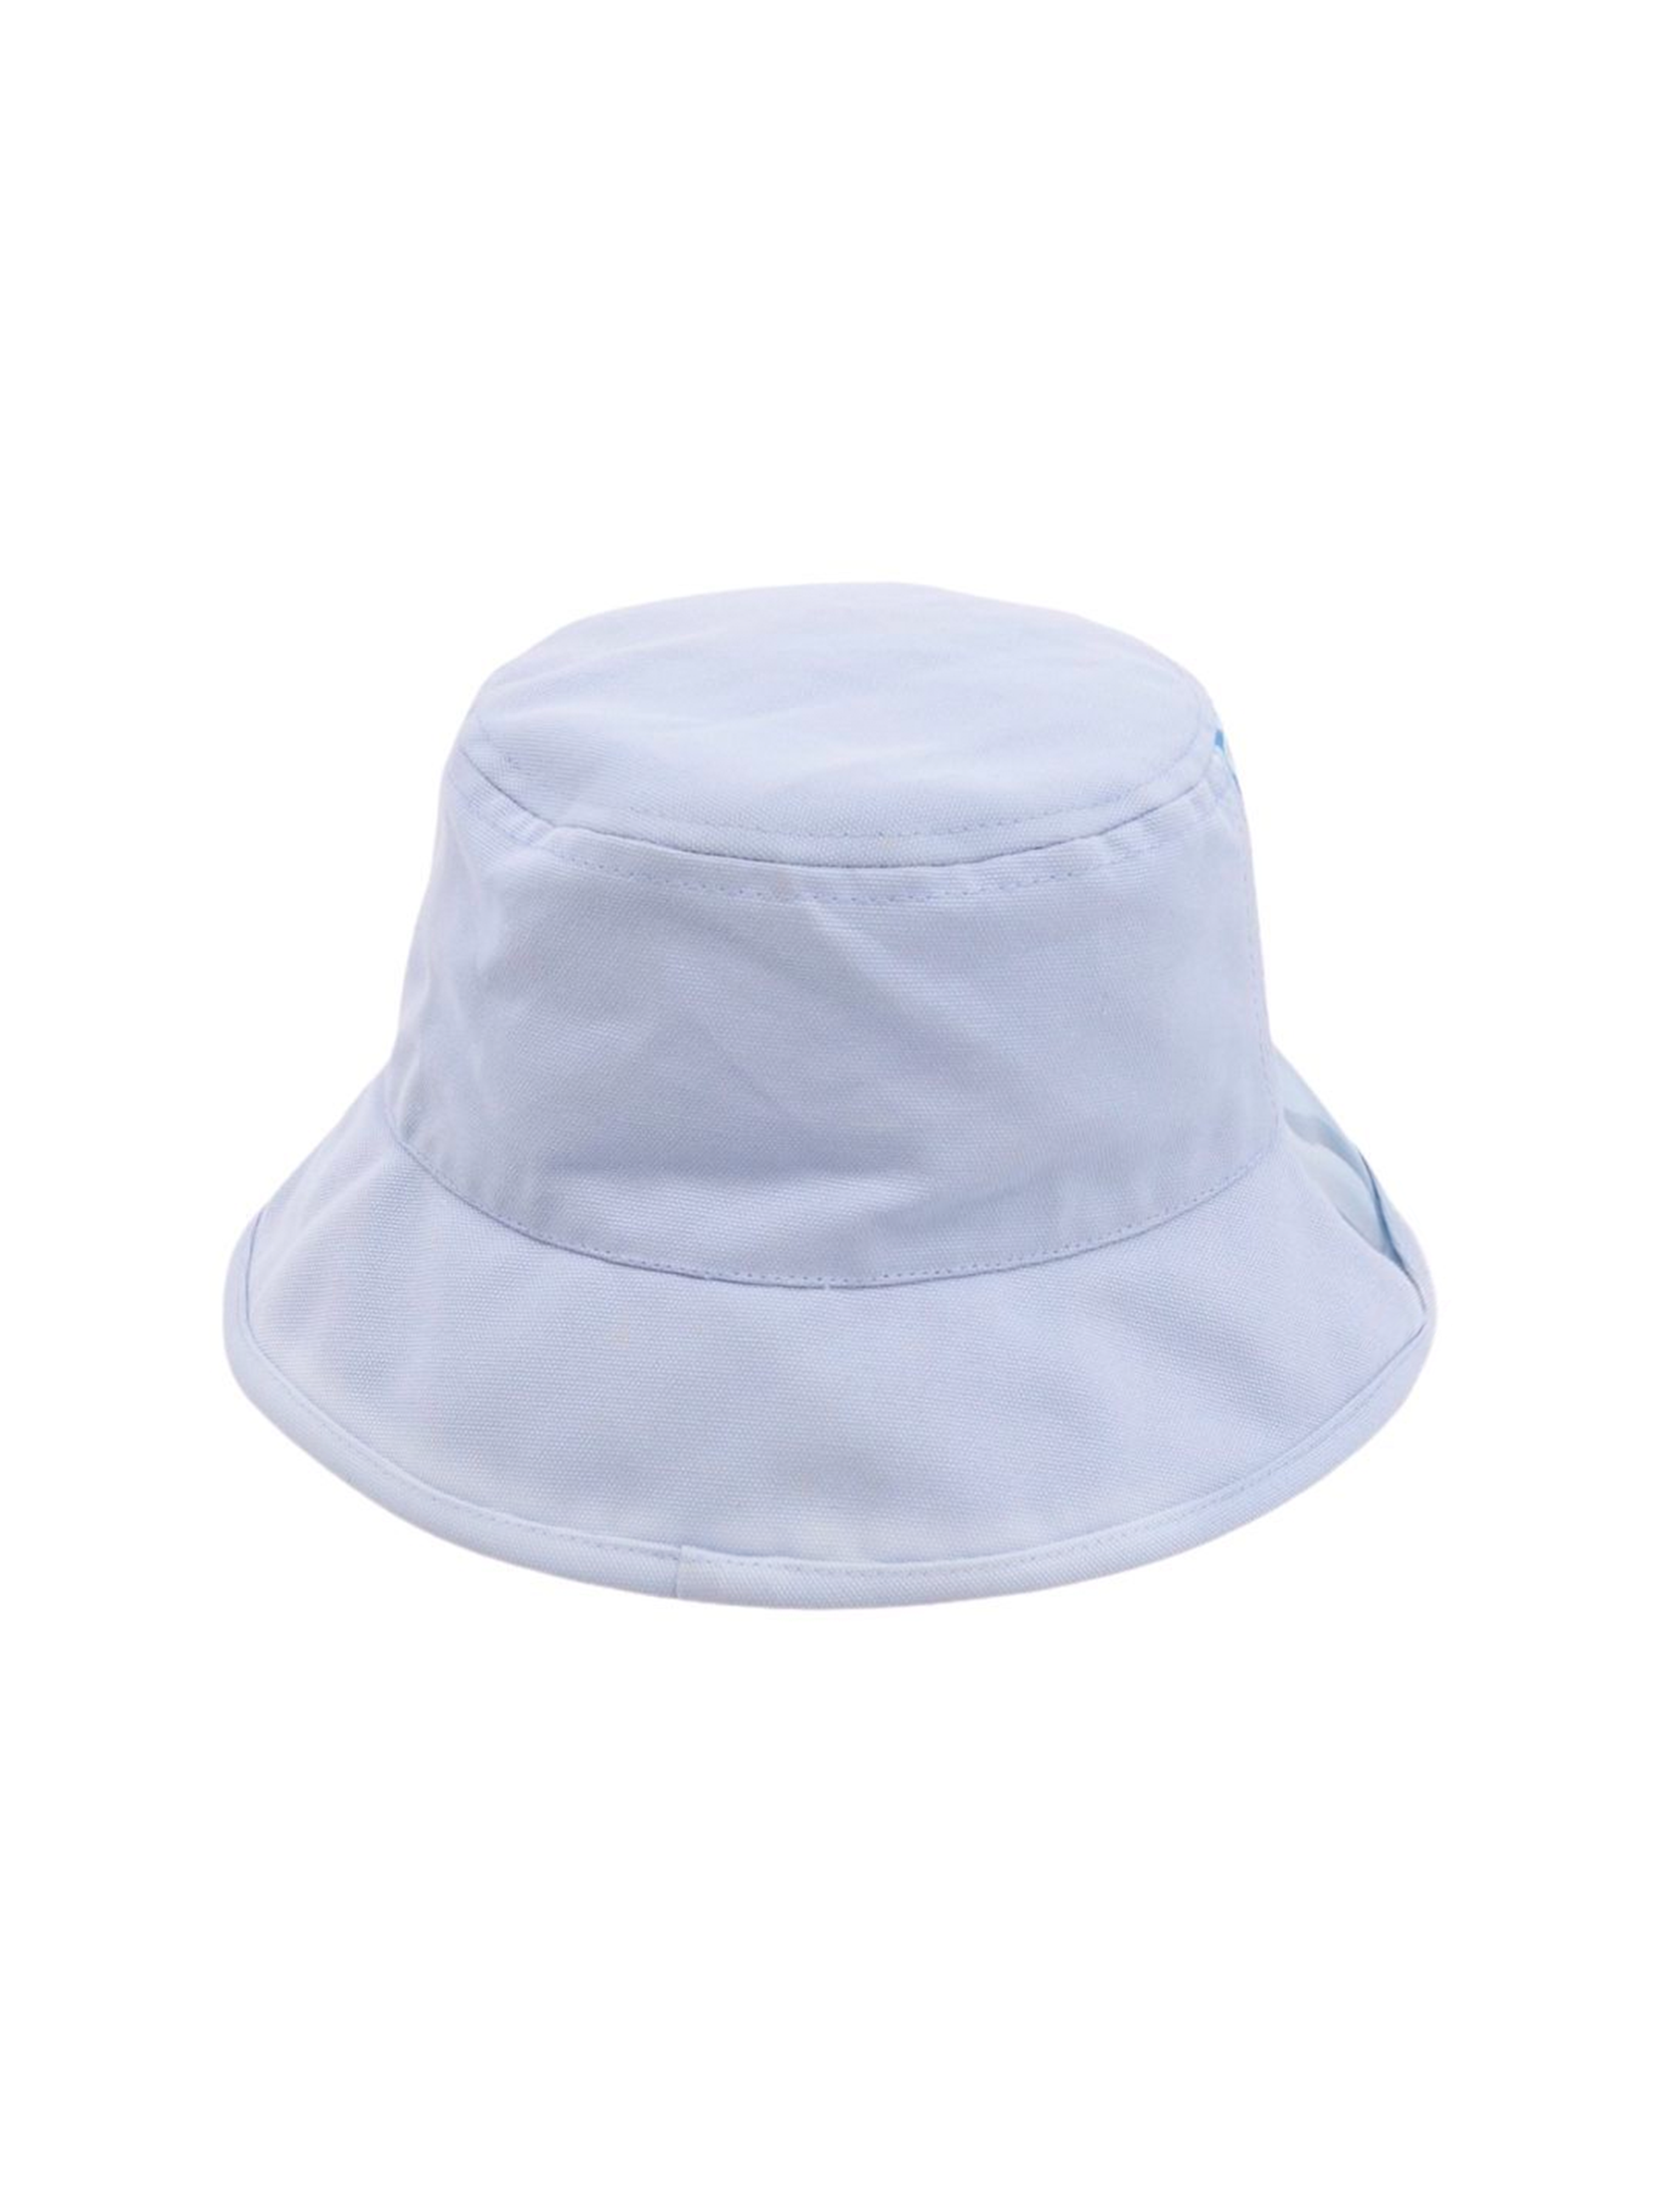 Chanel 2002 Clear Surf Bucket Hat Rare